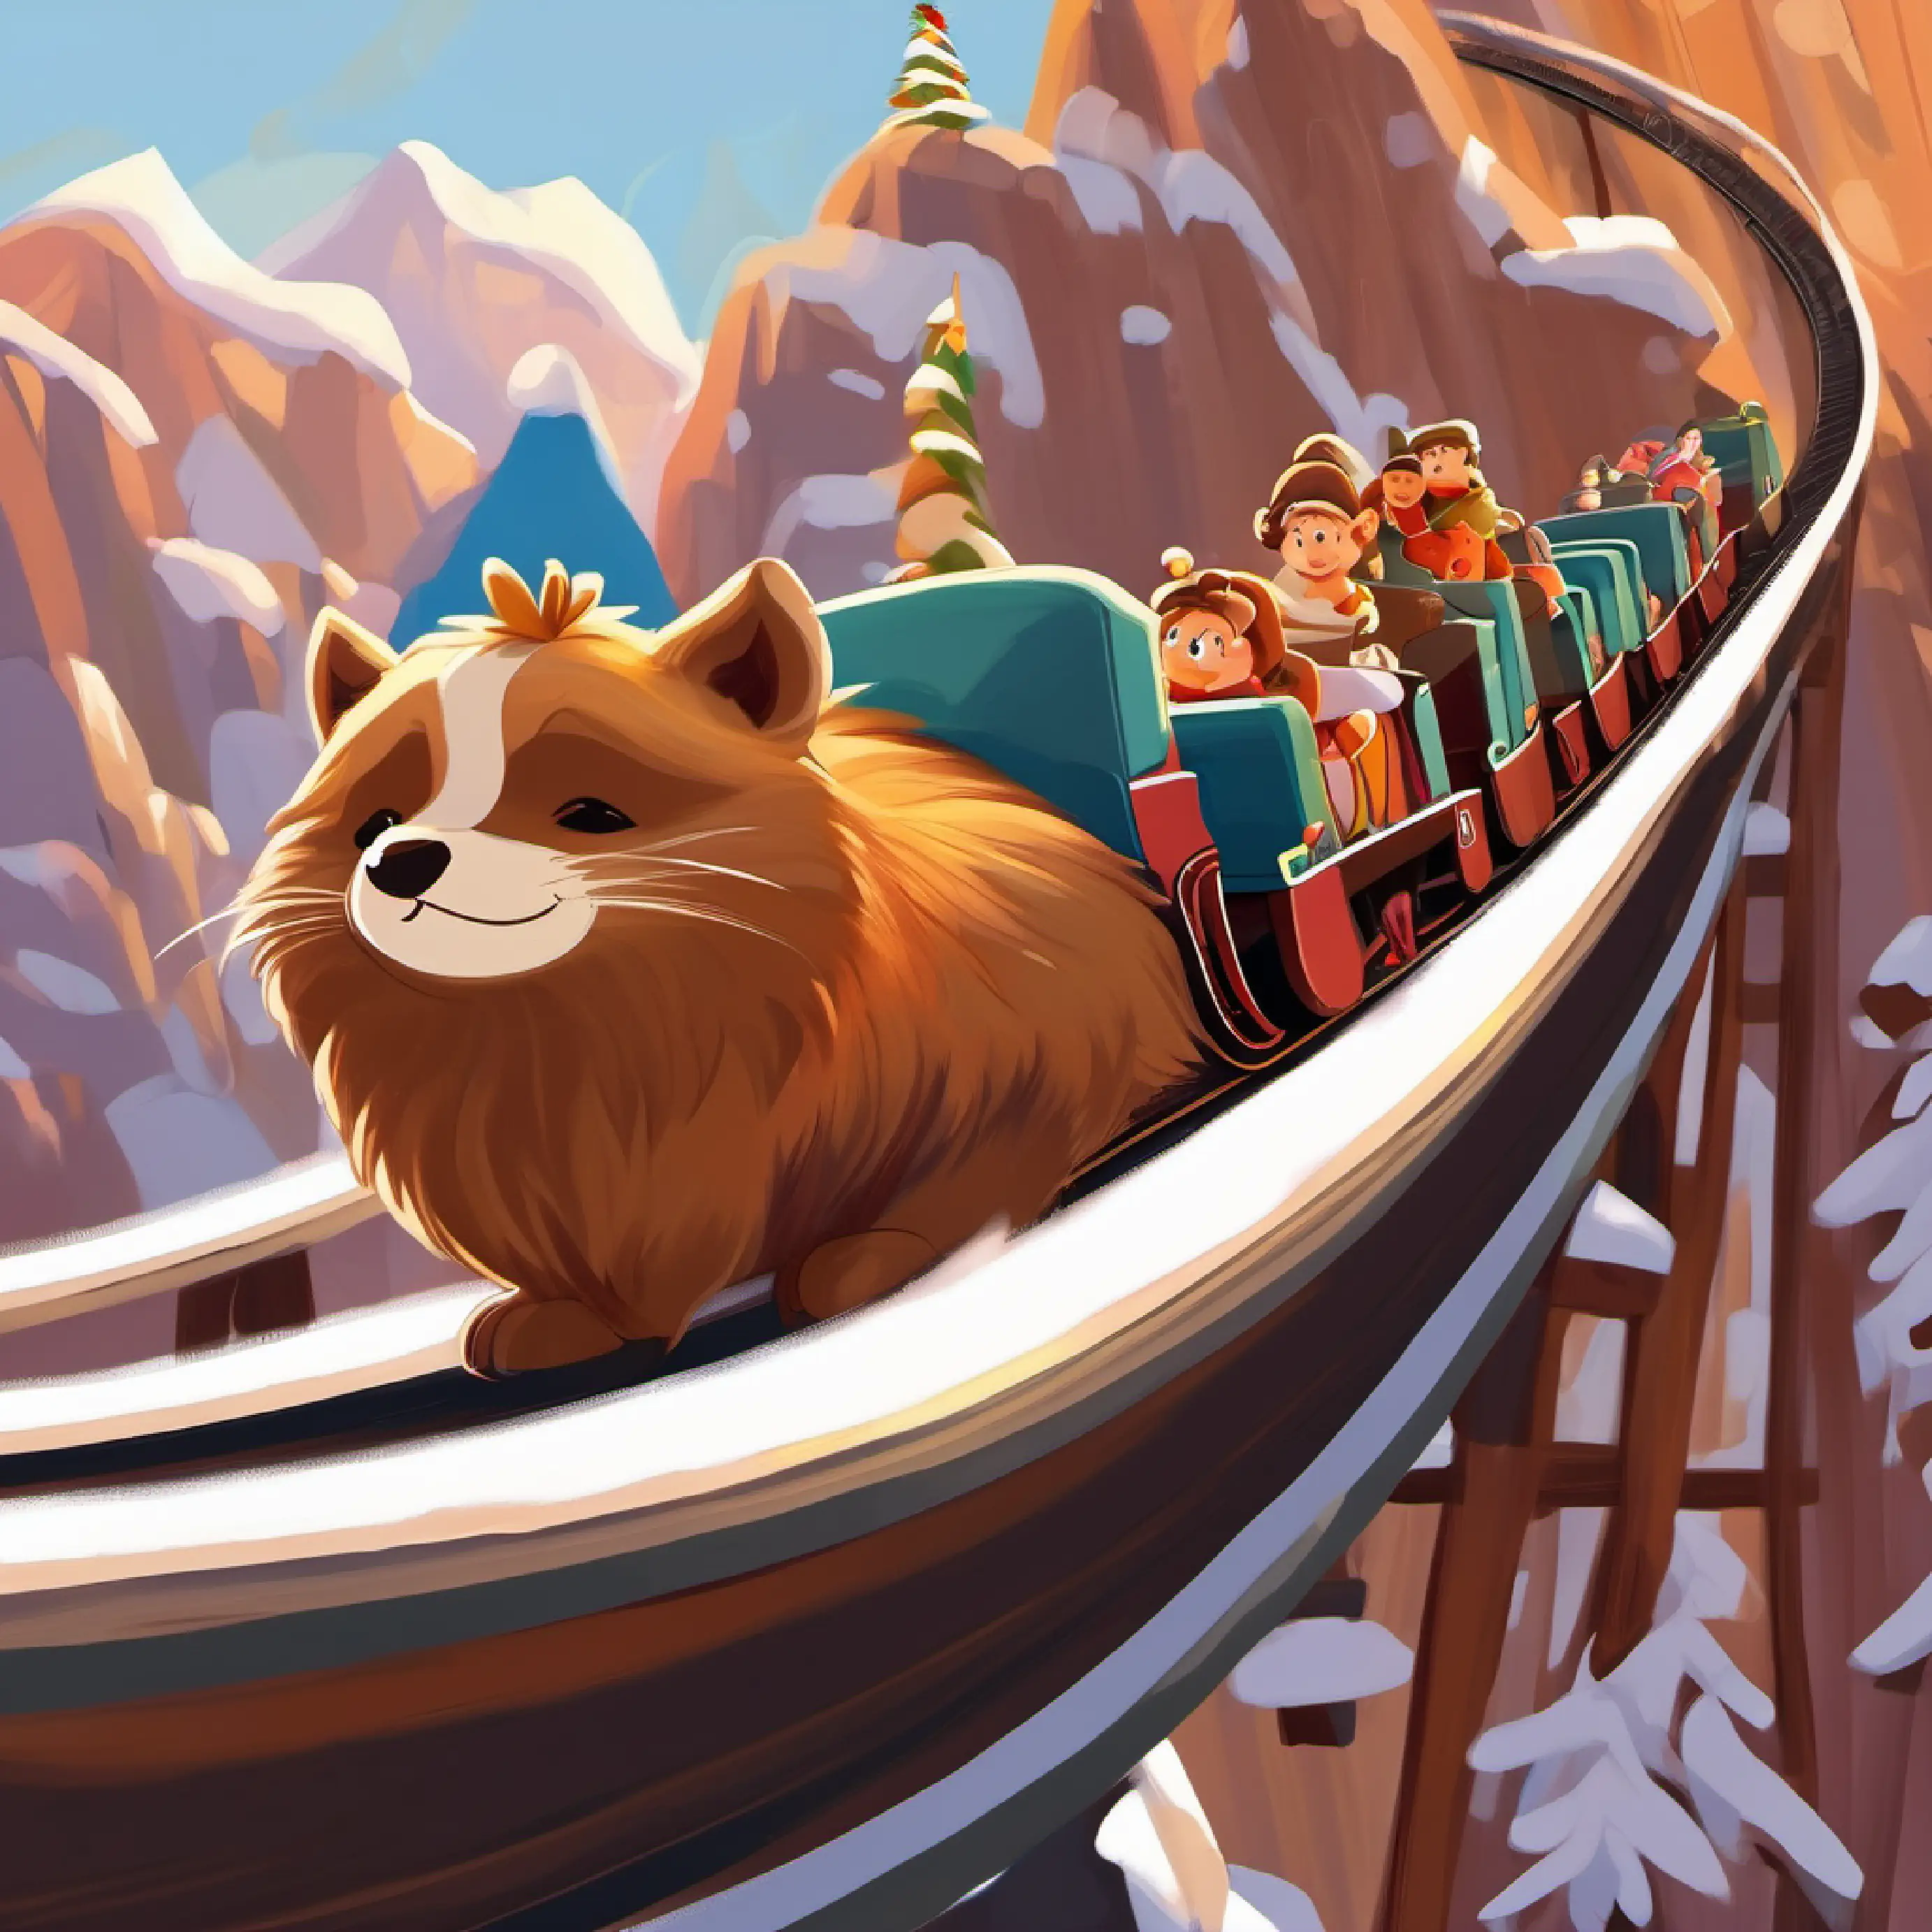 Brown fur, dark eyes, small size, playful demeanor, always curious experiences the rollercoaster climbing higher.